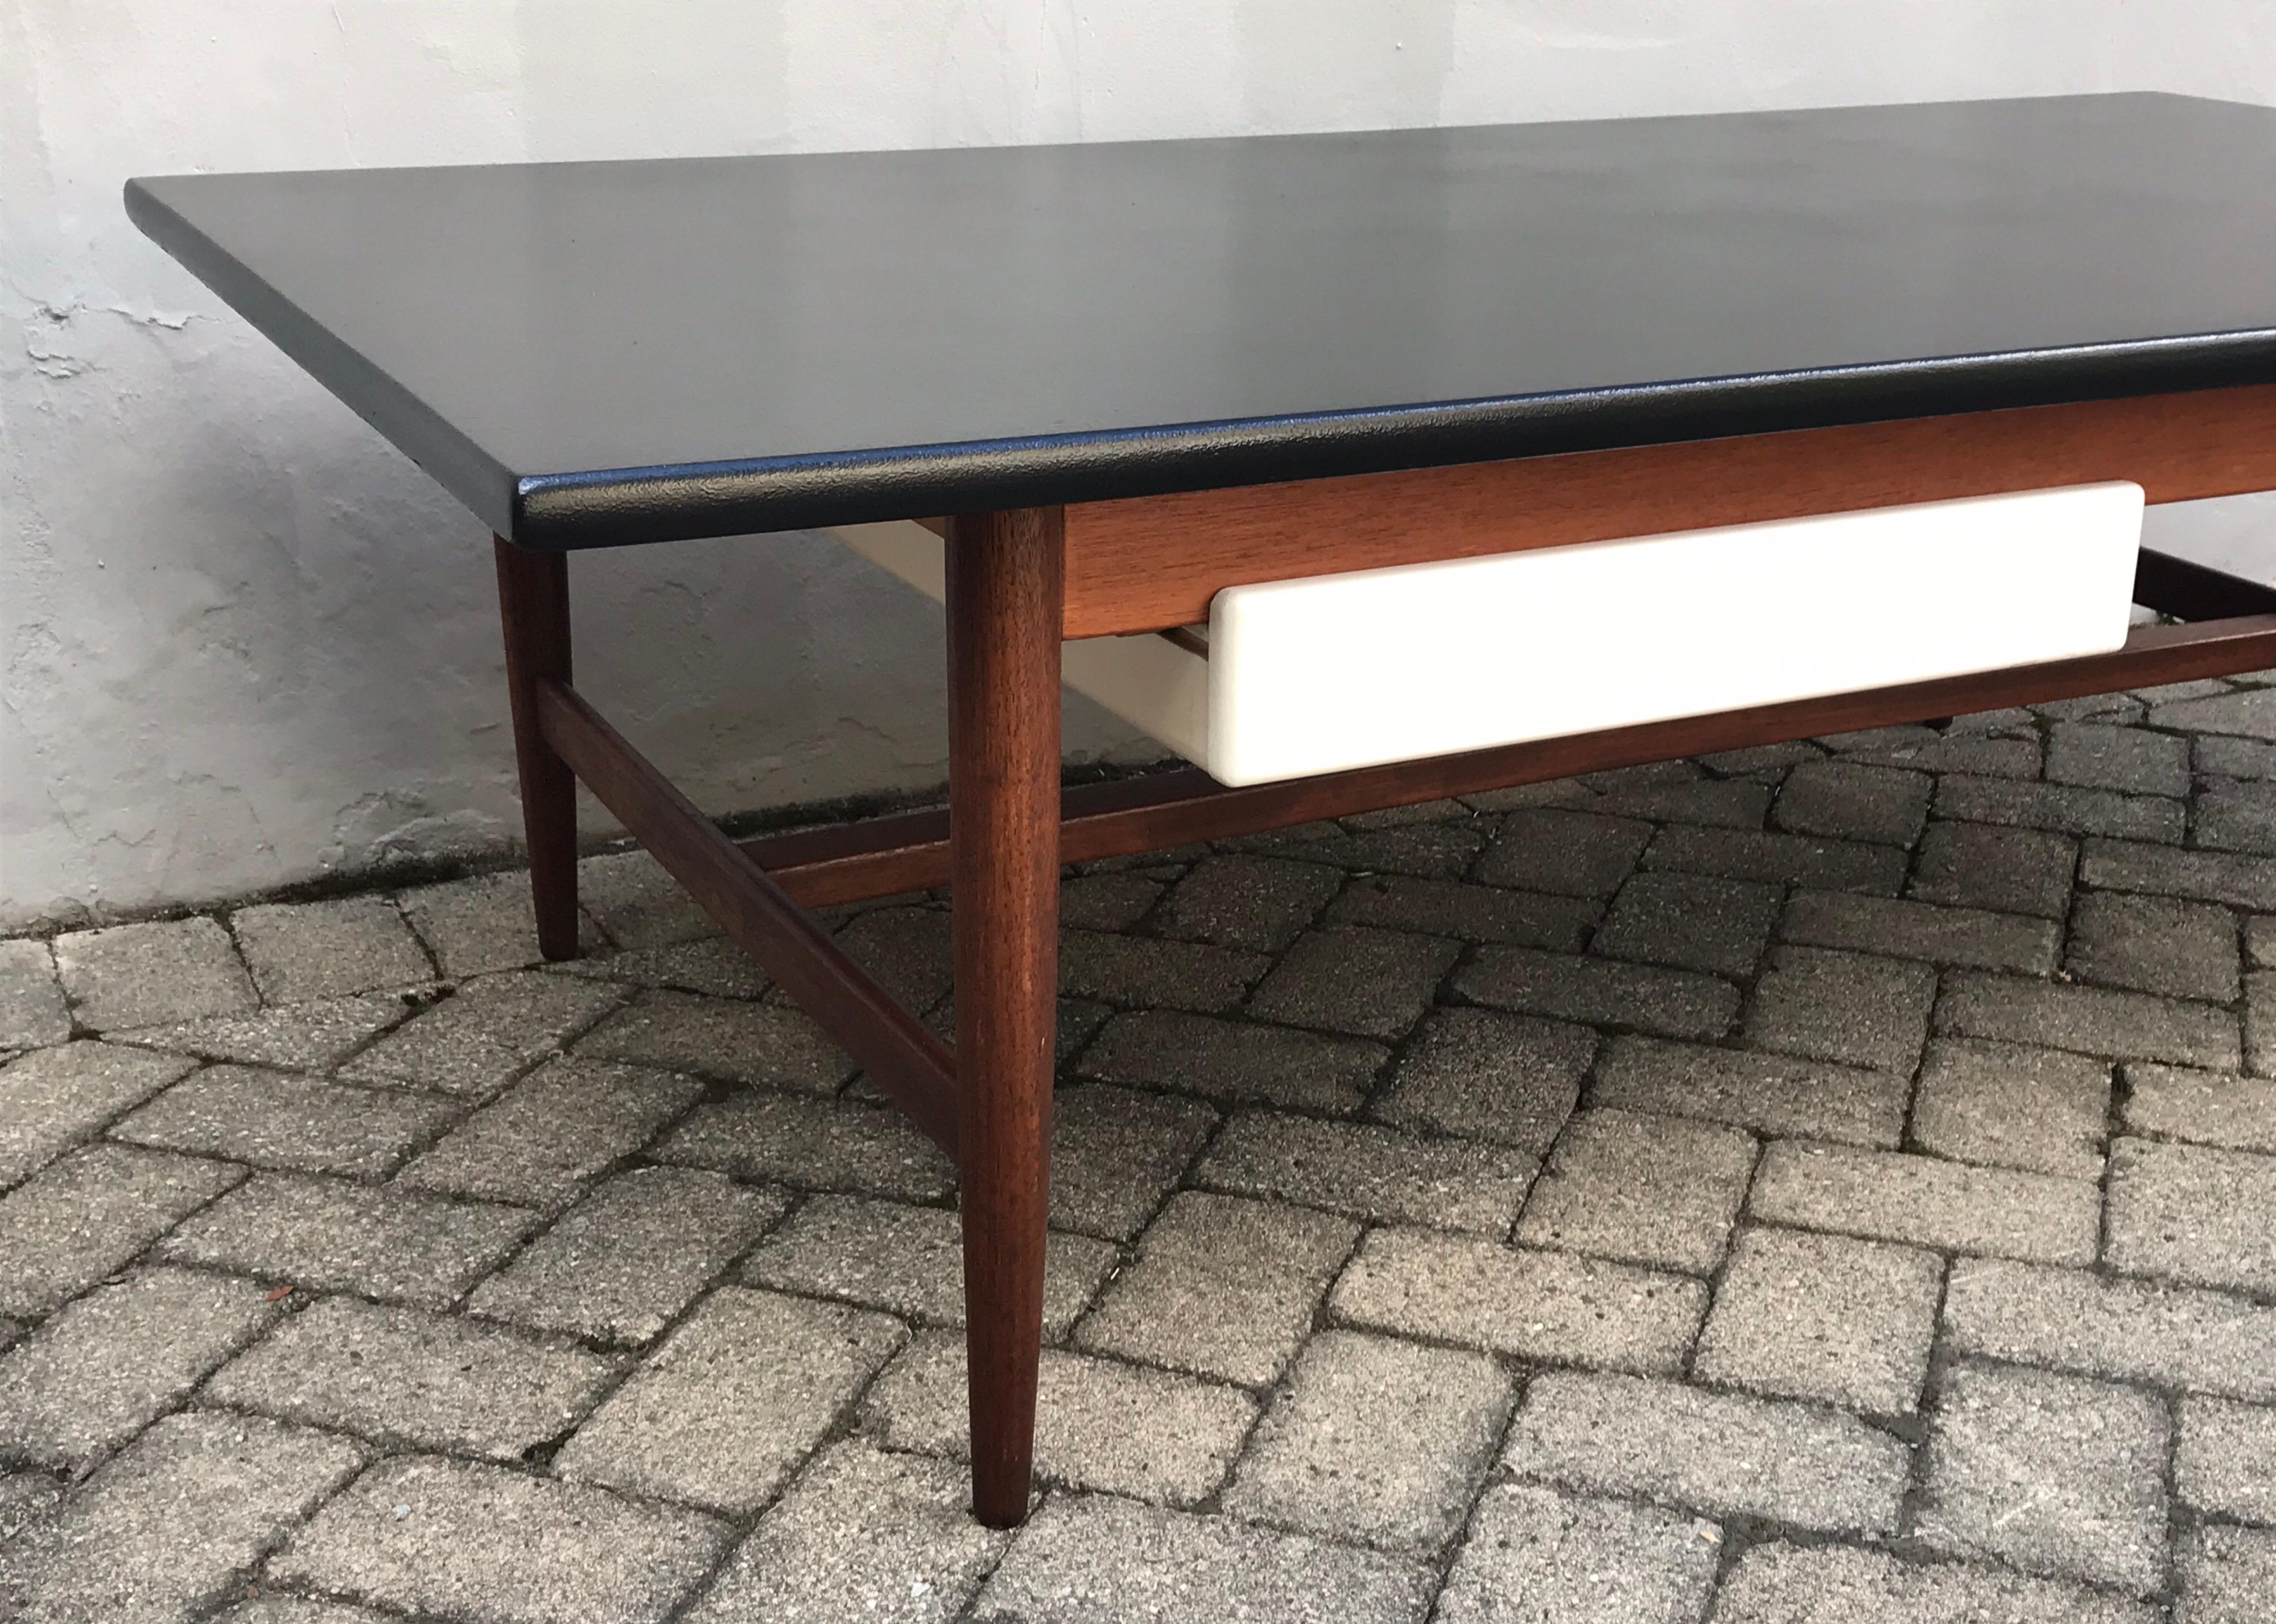 Very nice large scale coffee table made in the Netherlands, 1960s
Solid teak frame with single matte white drawer, rich satin black top.